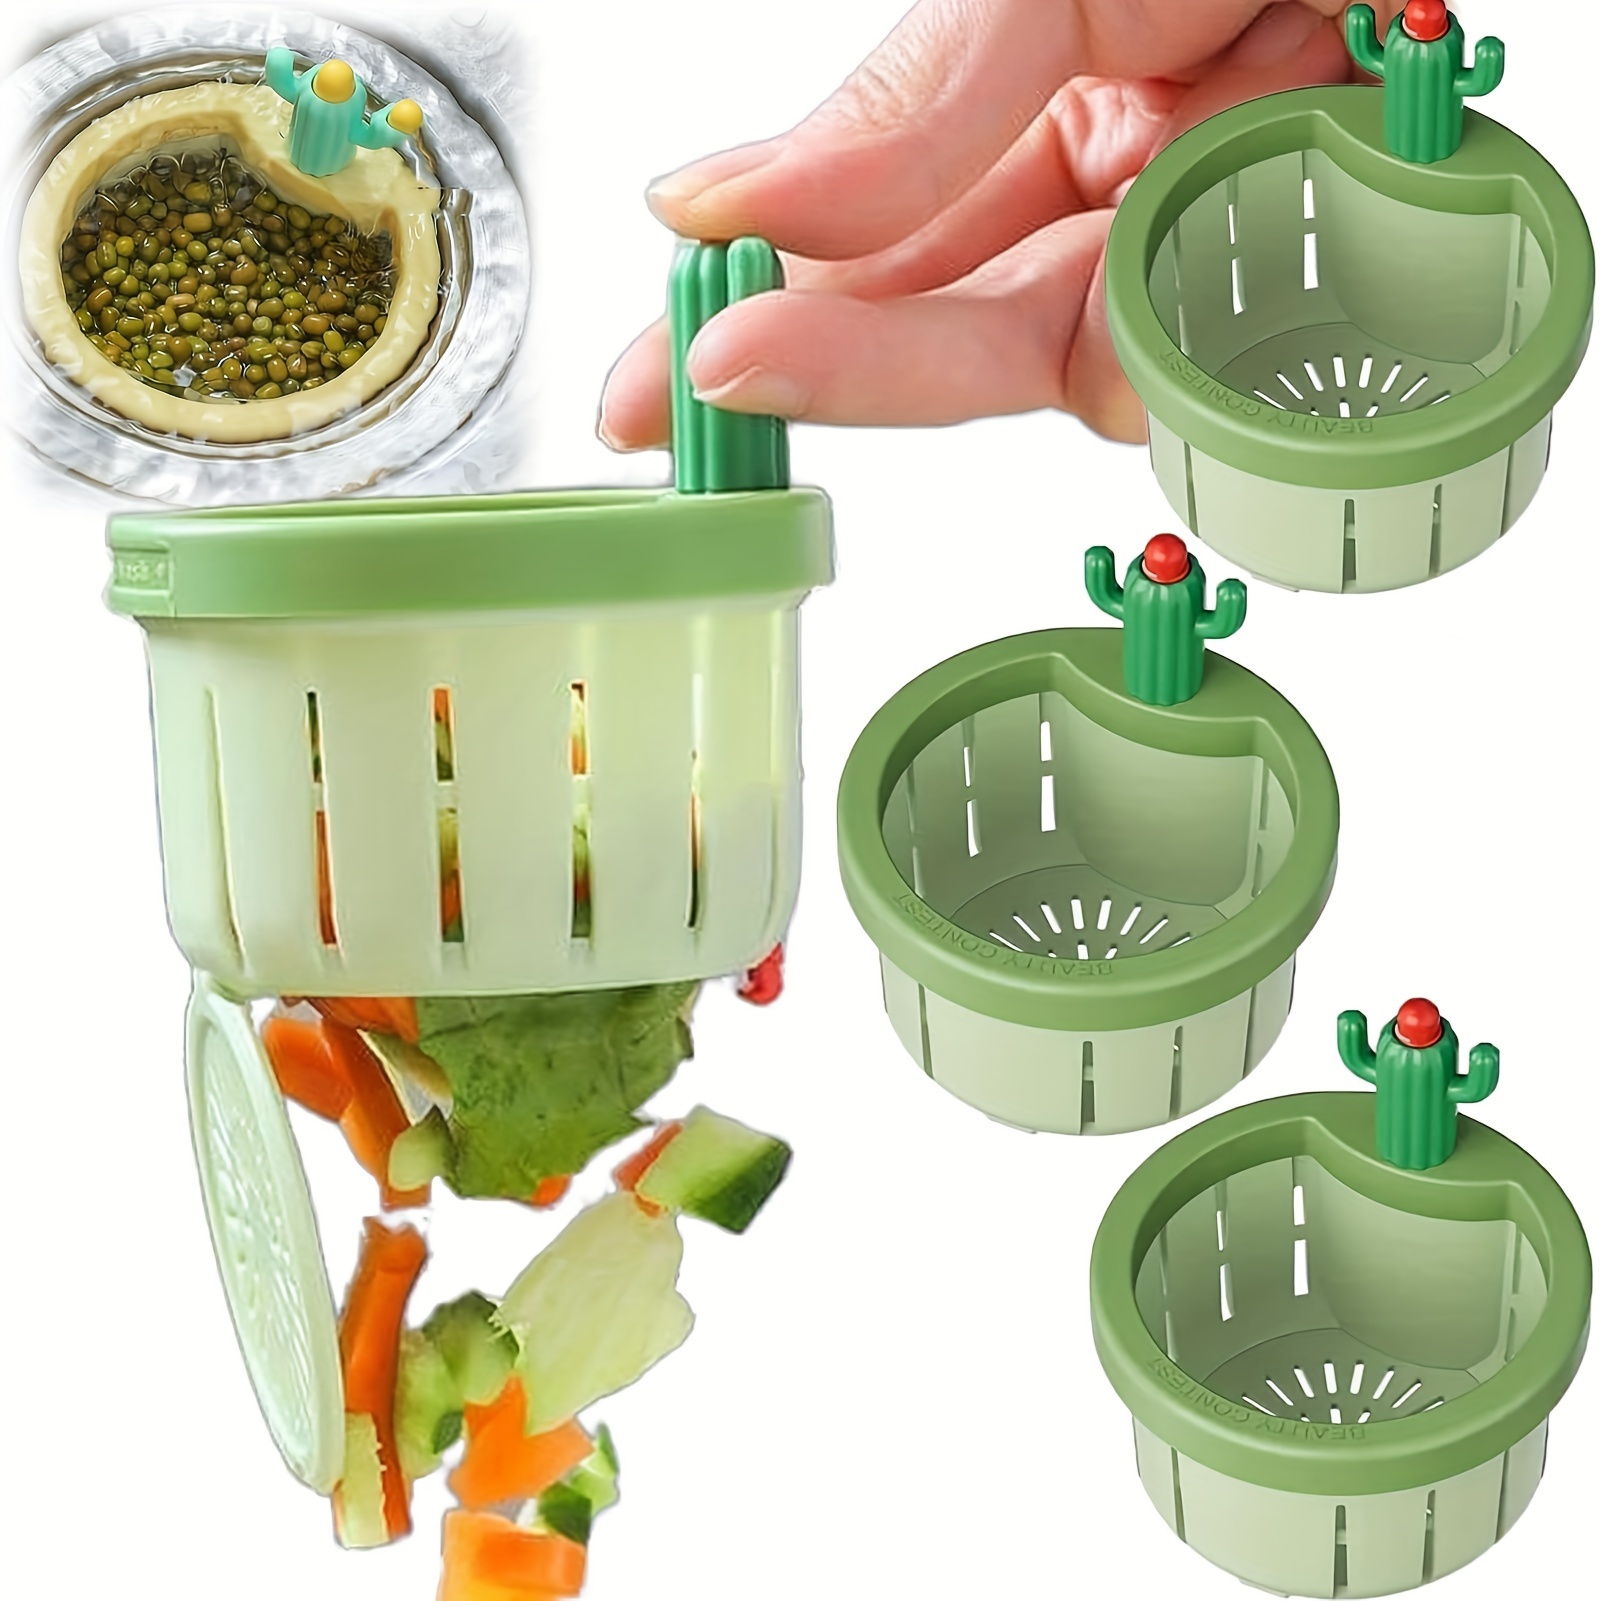 

Cactus Kitchen Sink Drain Strainer, Press Automatic Dumping Basket, Multi-functional Home Use Cactus Sink Draining Basket Filter Net Lifting Basket, Kitchen Waste Collector Filte